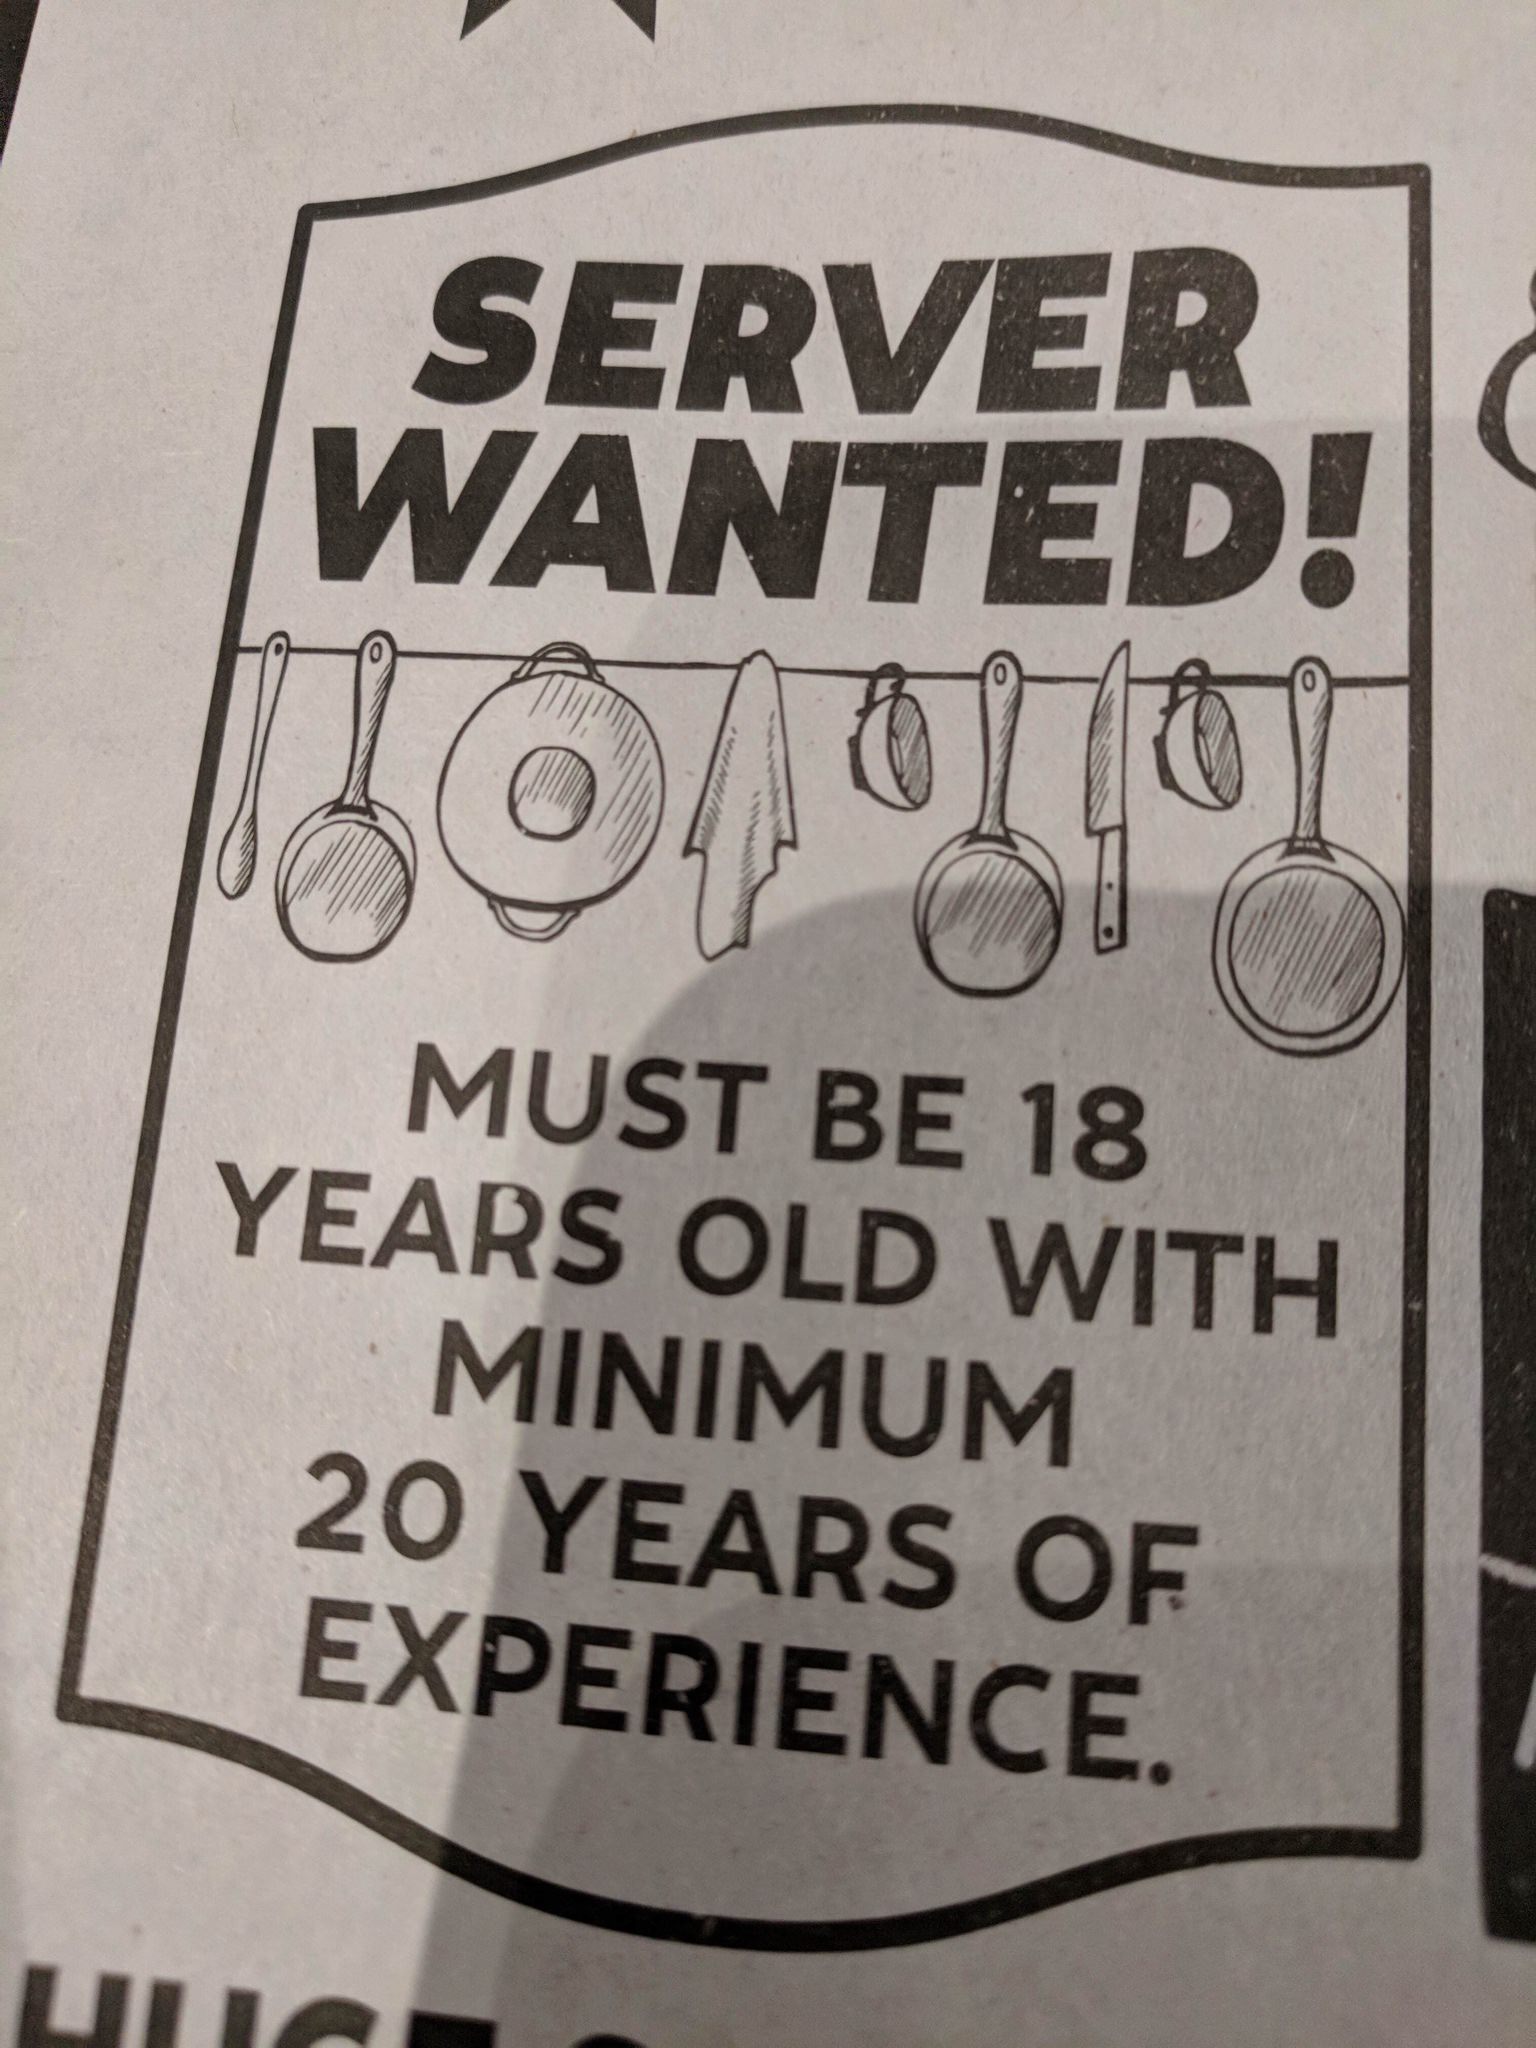 memes - server wanted - Server Wanted! Toto Must Be 18 Years Old With Minimum 20 Years Of Experience.